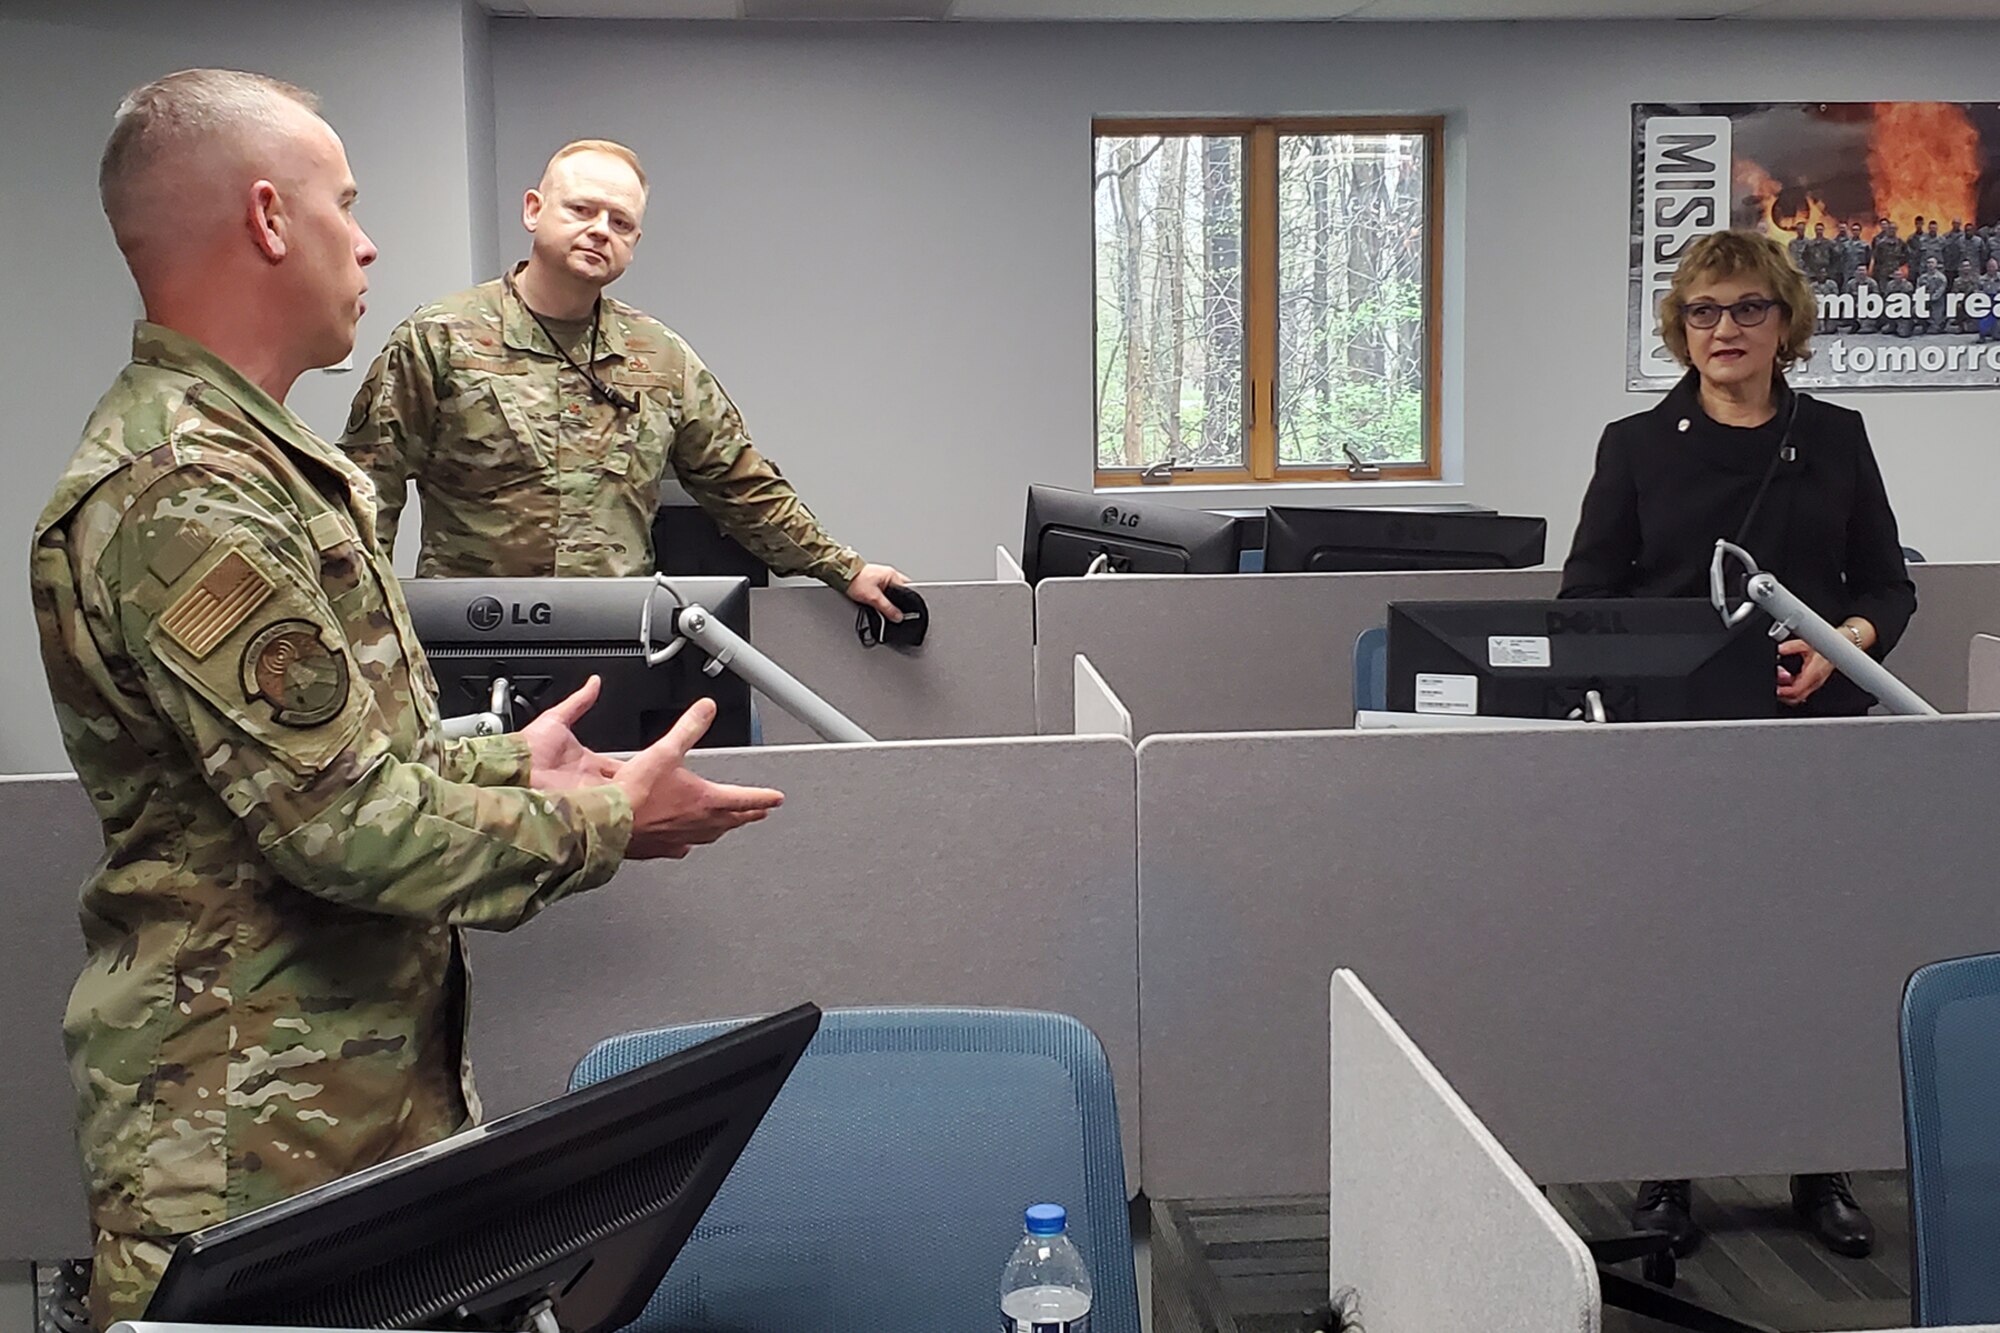 The Air Force Reserve’s 910th Airlift Wing welcomed Ohio State Senator Sandra O’Brien for a visit to Youngstown Air Reserve Station, Ohio, on Thursday, April 29, 2021.